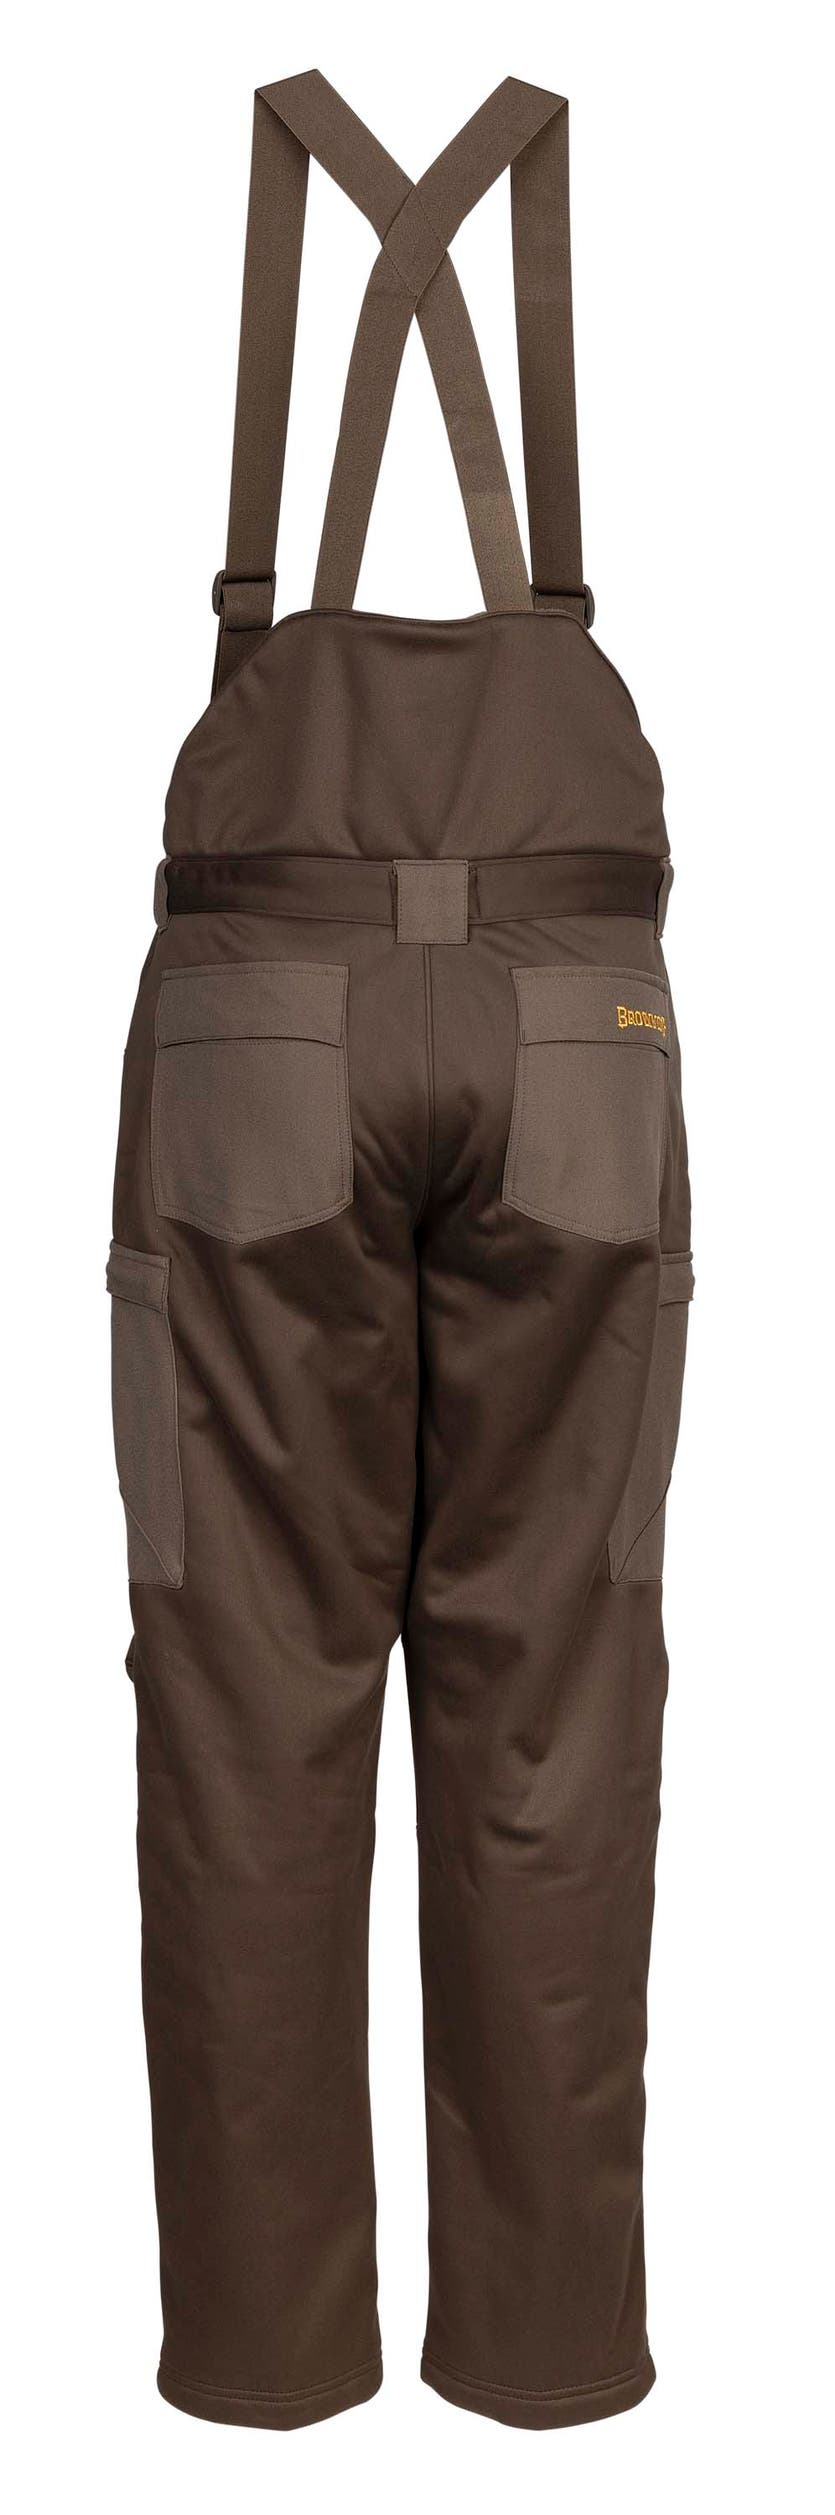 Dutton Hybrid Pant - Hunting Clothing - Browning